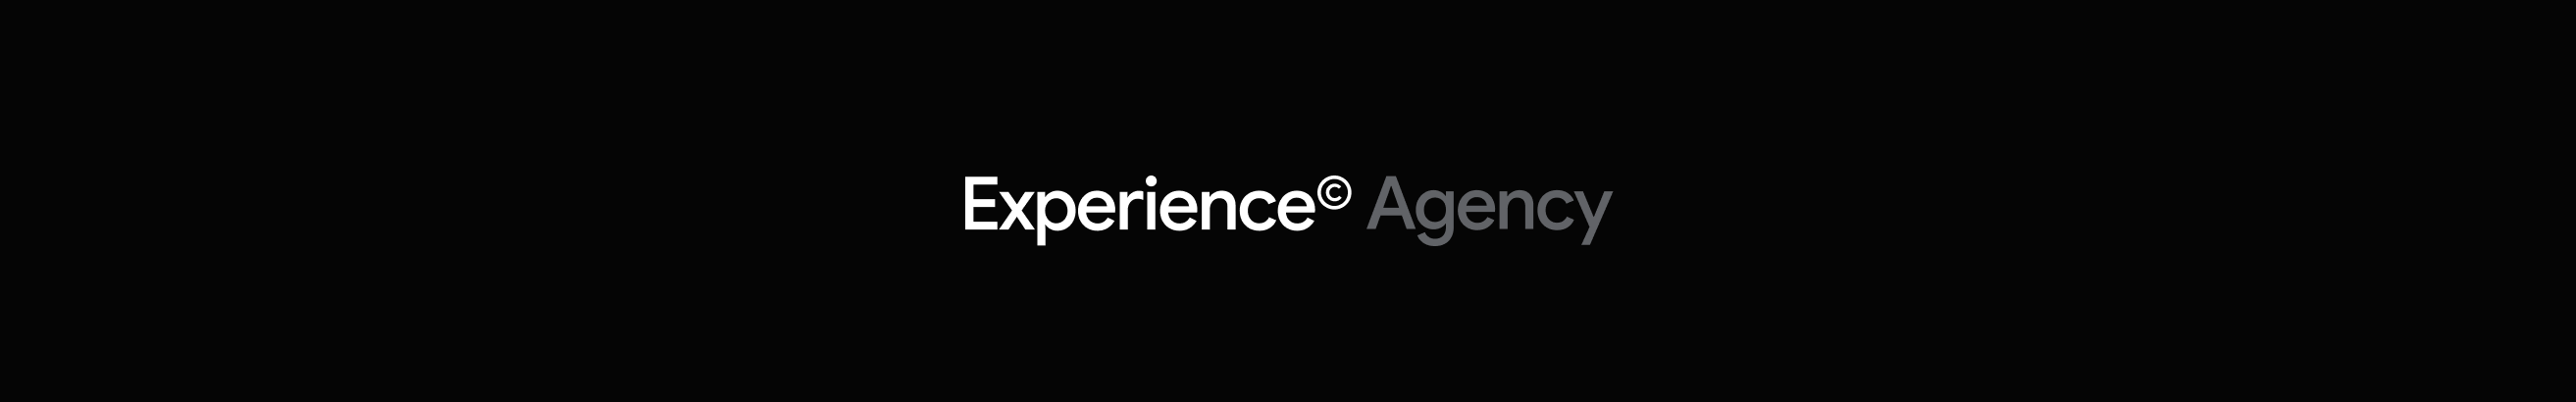 Experience© Agency's profile banner